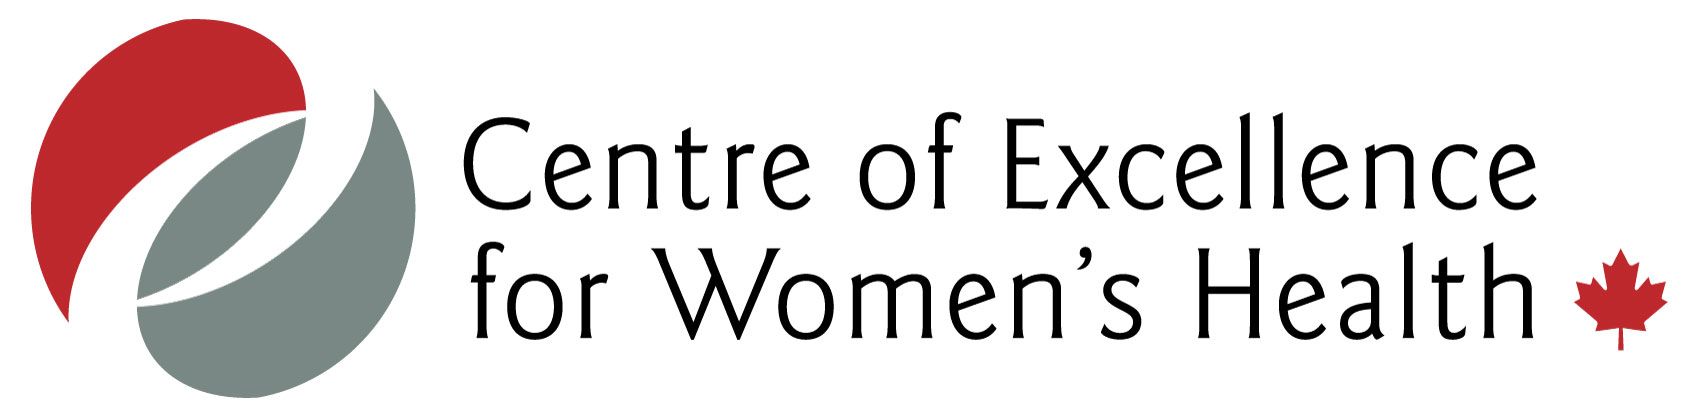 Centre of Excellence for Women’s Health - Logo